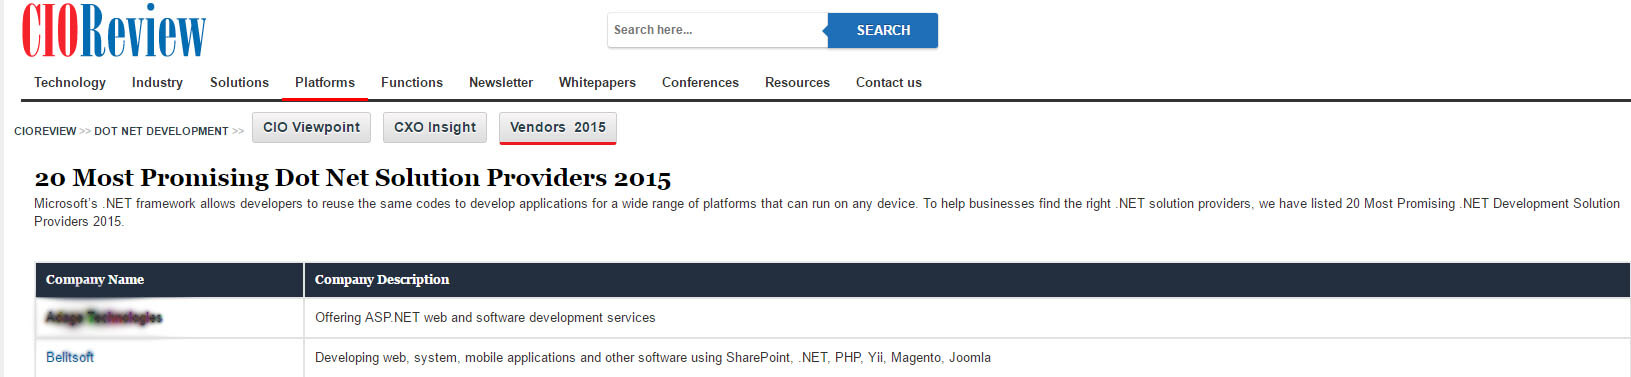 Belitsoft Is Featured Among 20 Most Promising .NET Development Solution Providers by CIOReview